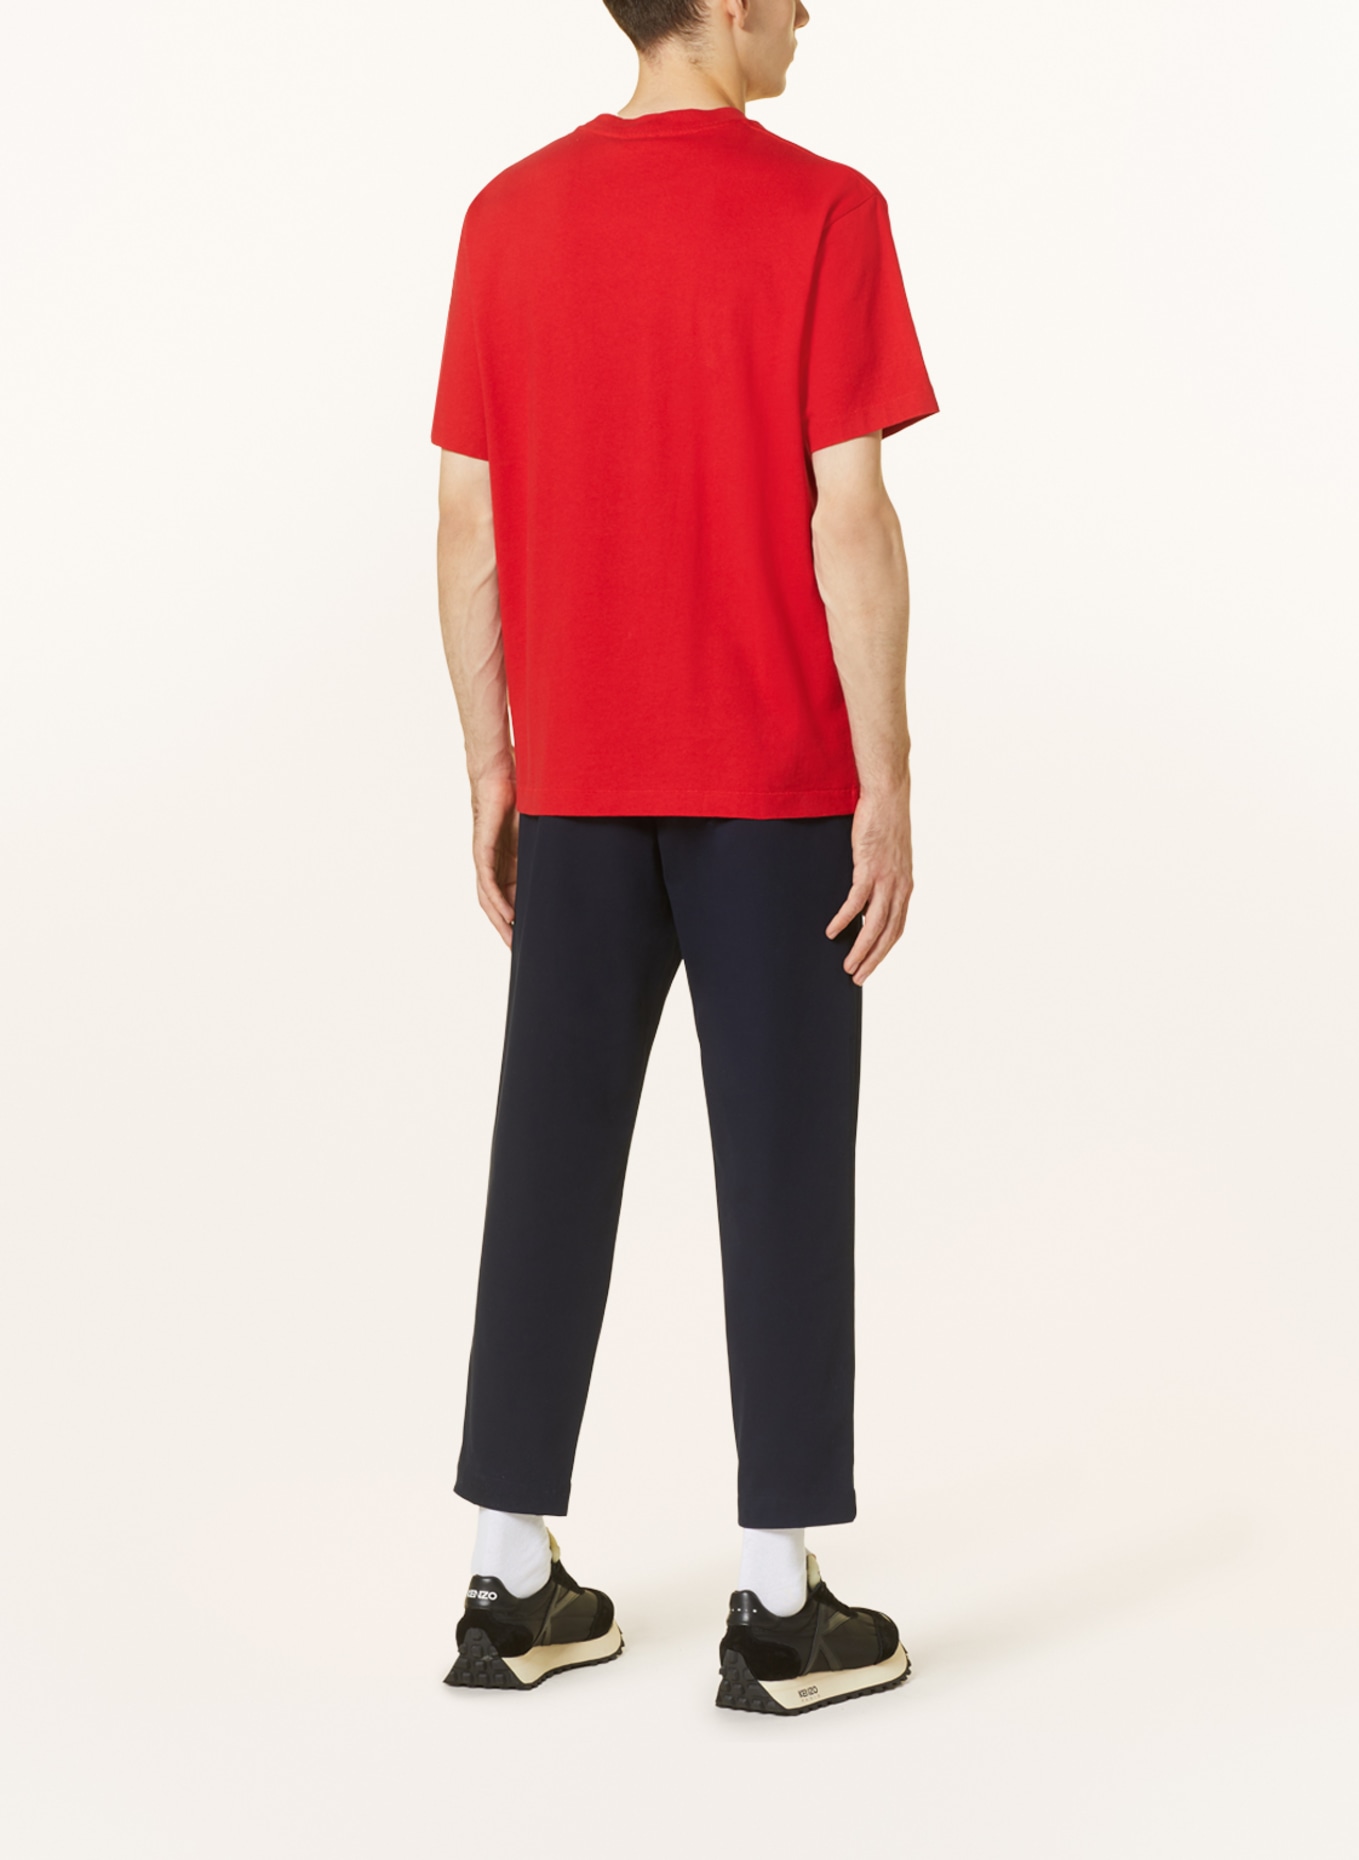 KENZO T-shirt, Color: RED (Image 3)